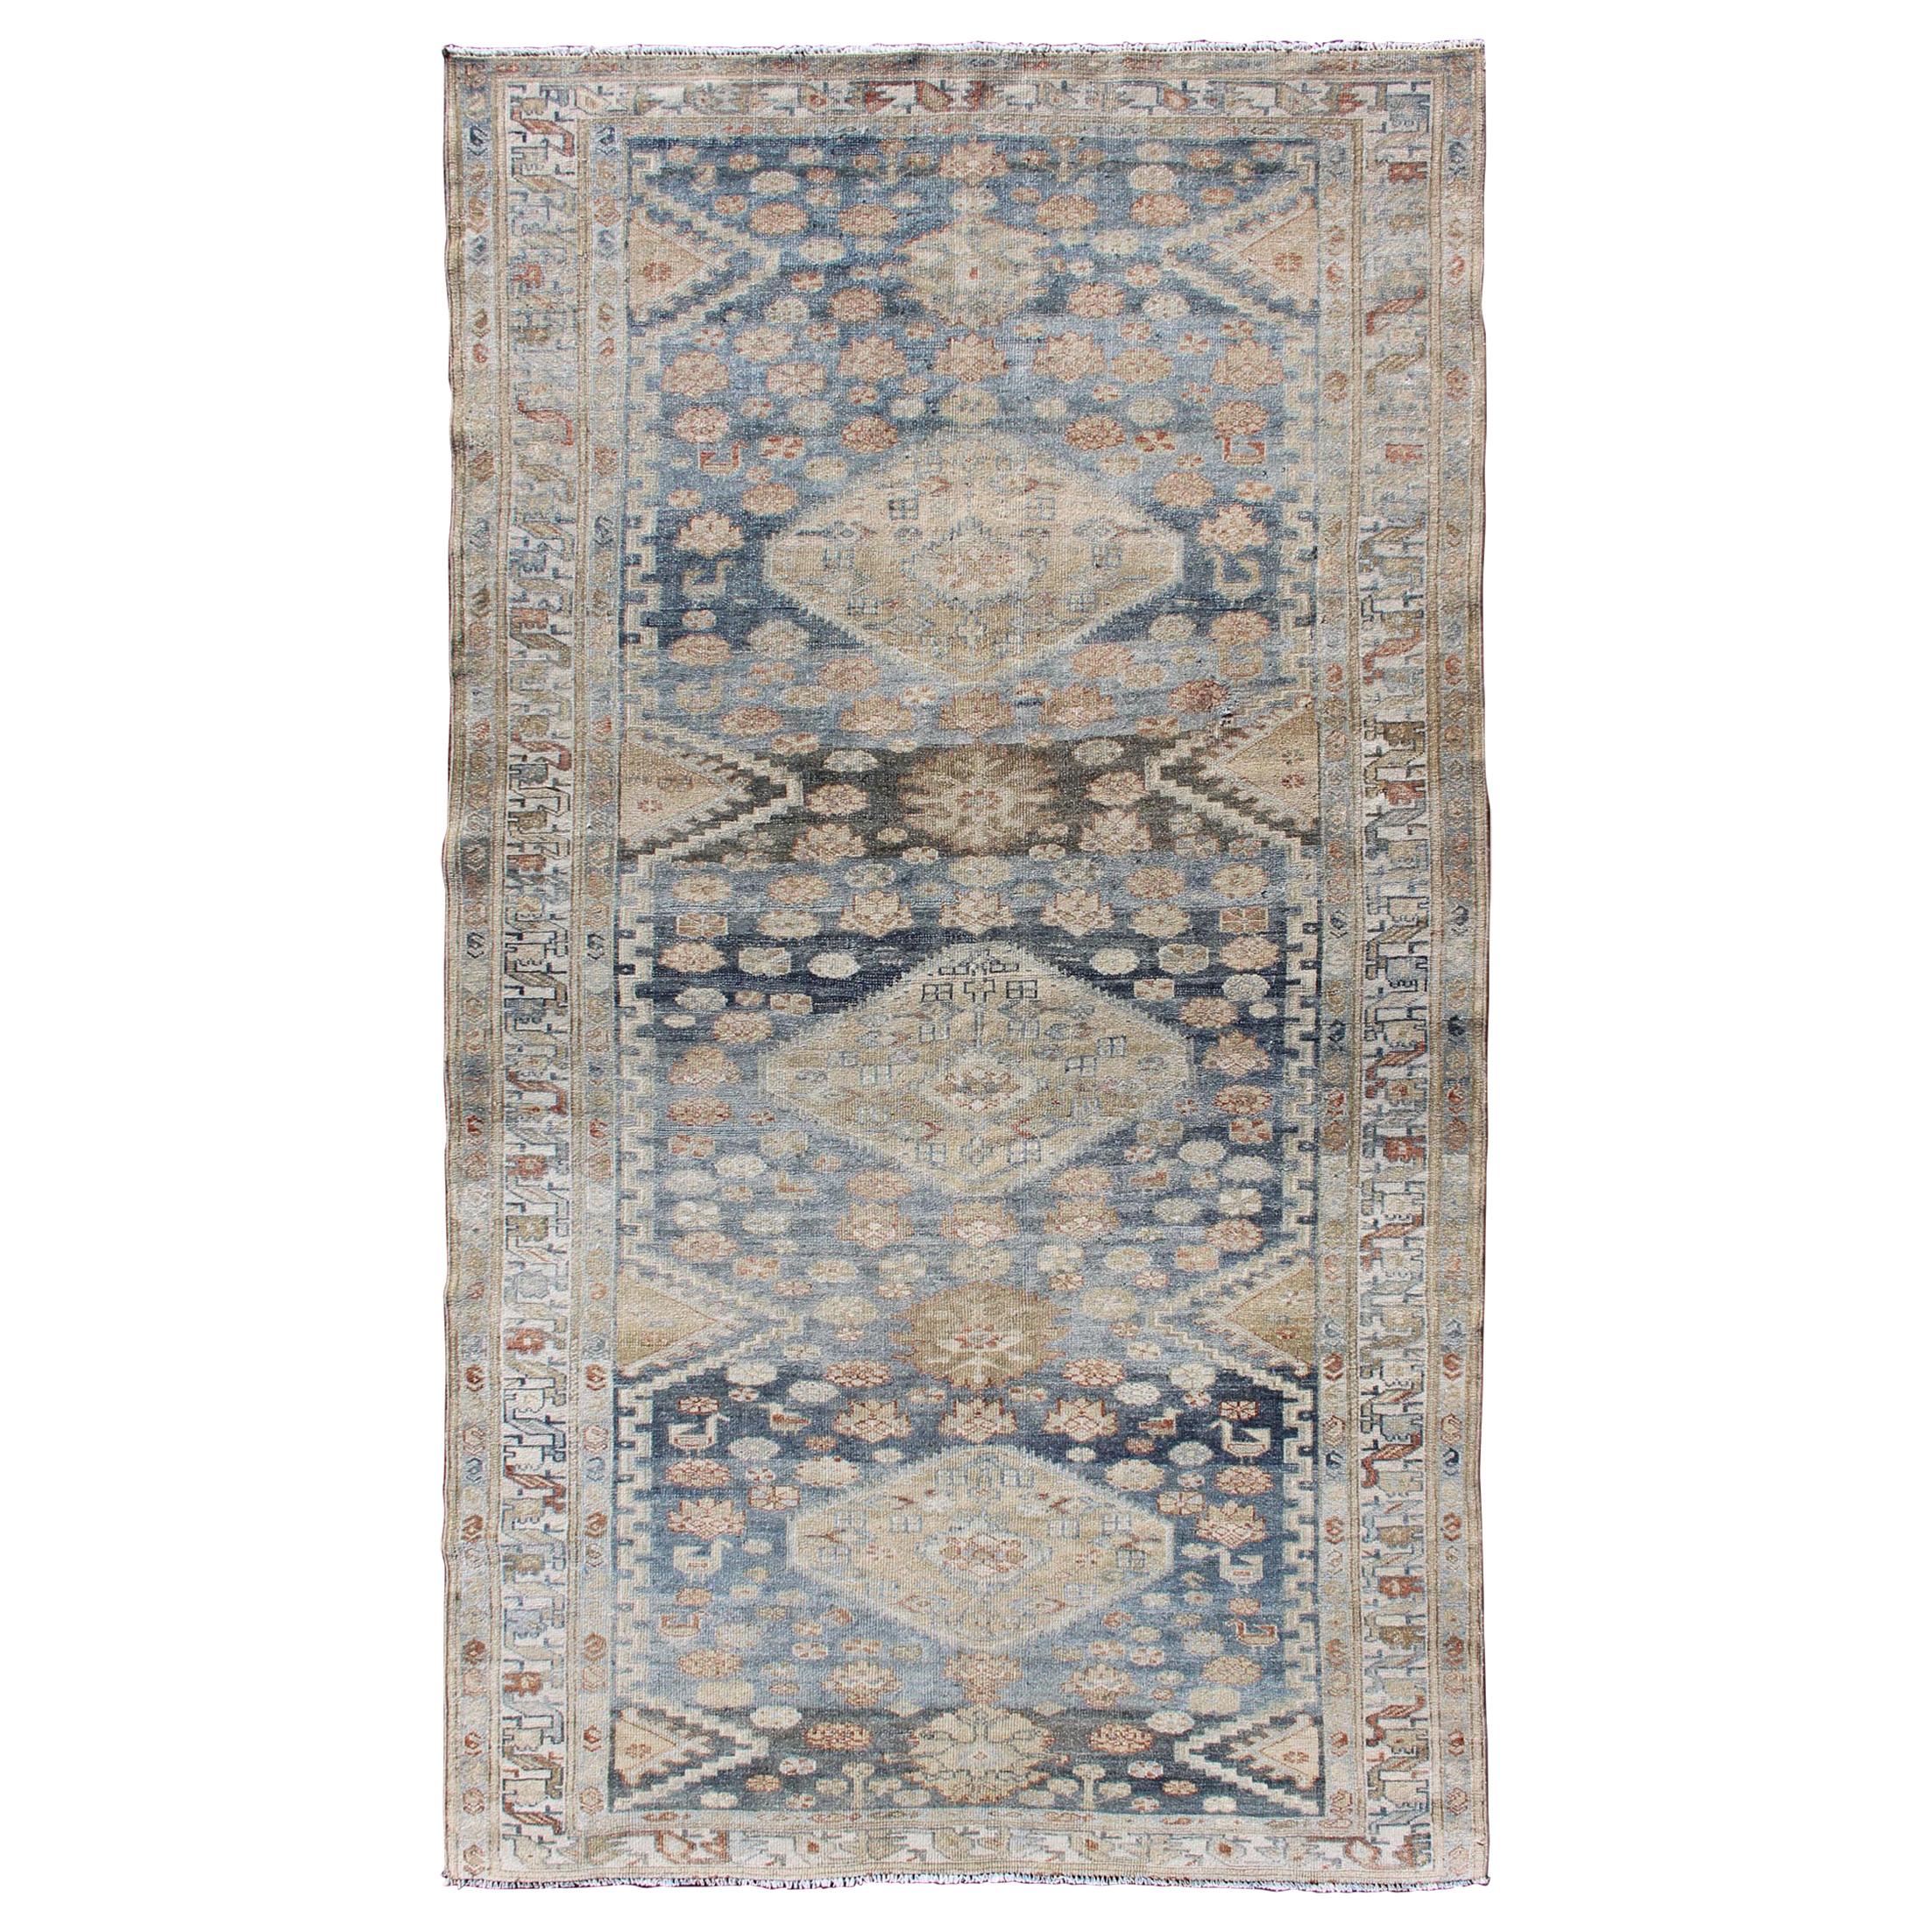 Tribal Persian Malayer Rug with Geometric Design in Steel Blue and Tan Tones